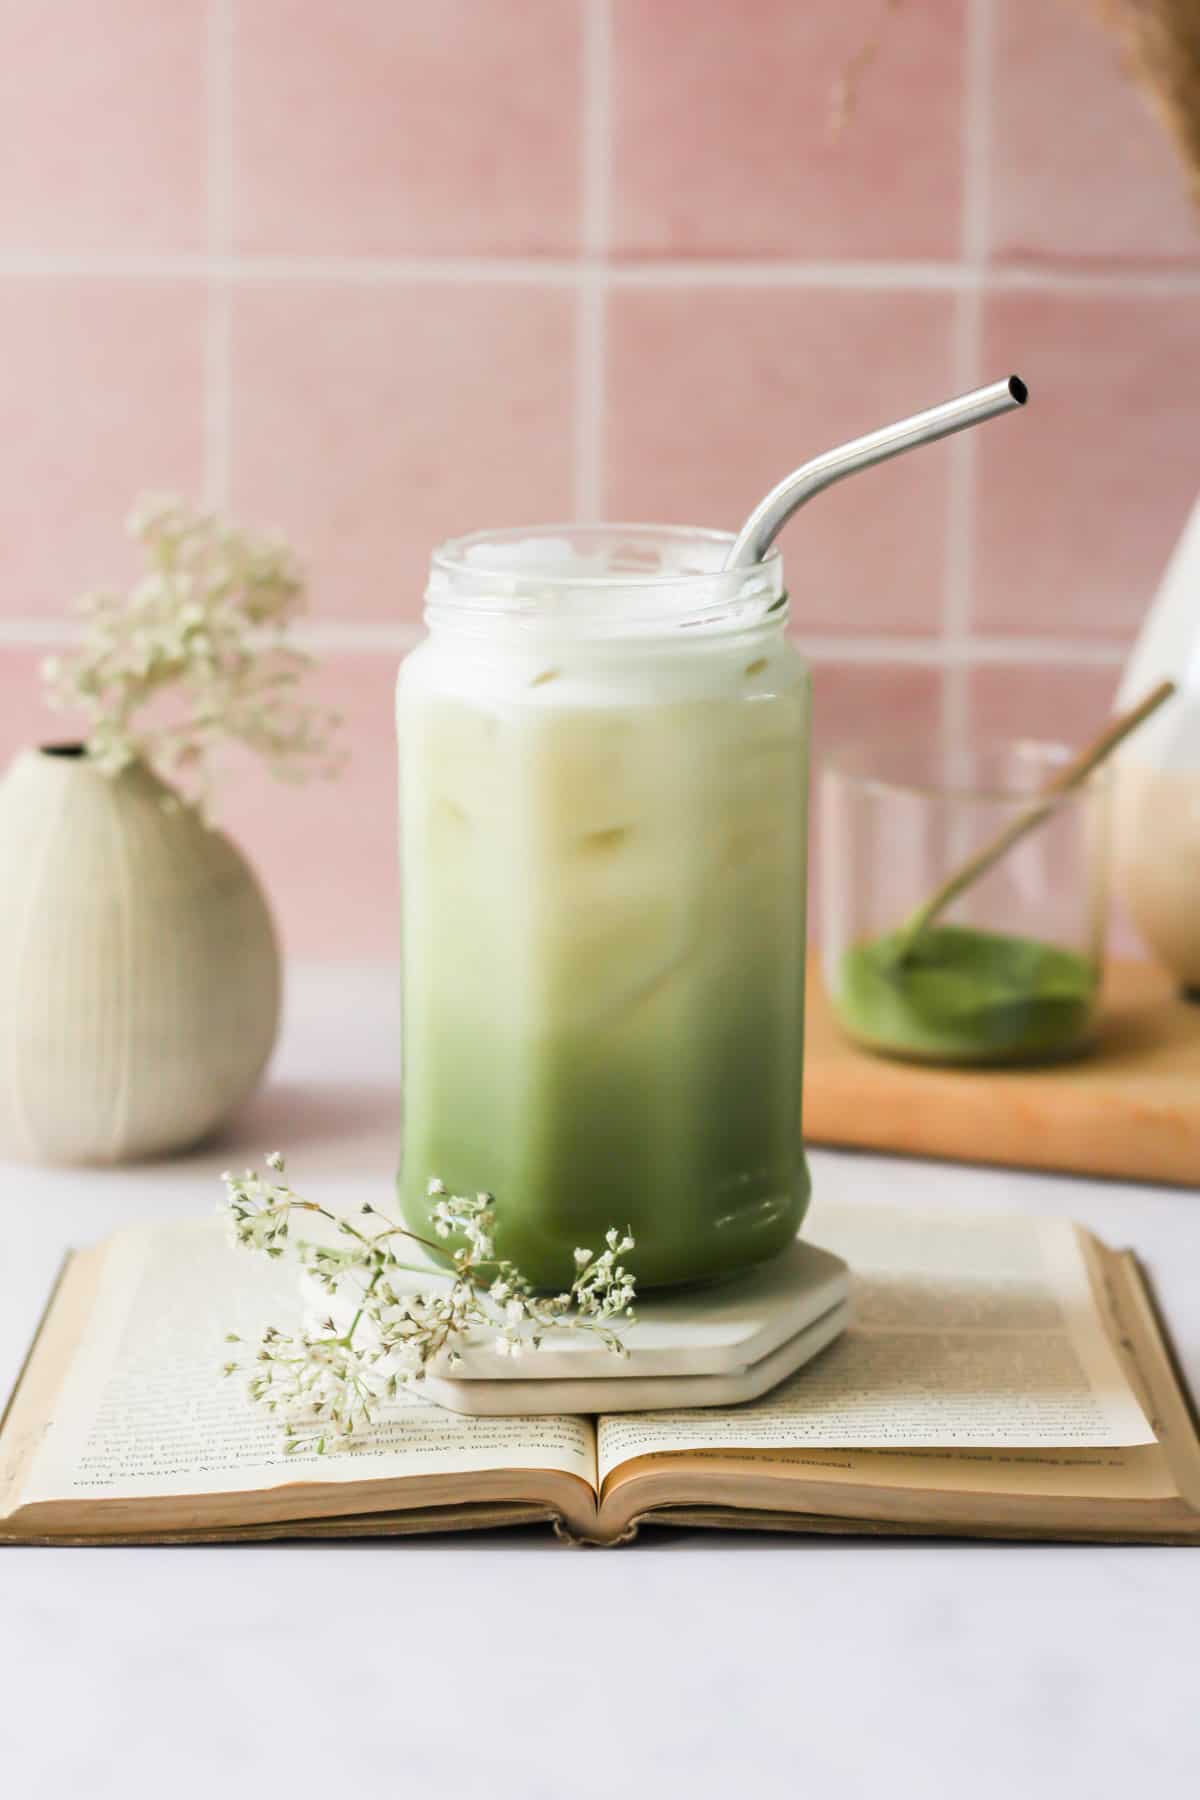 oat milk matcha latte in glass jar on a book with a silver straw.